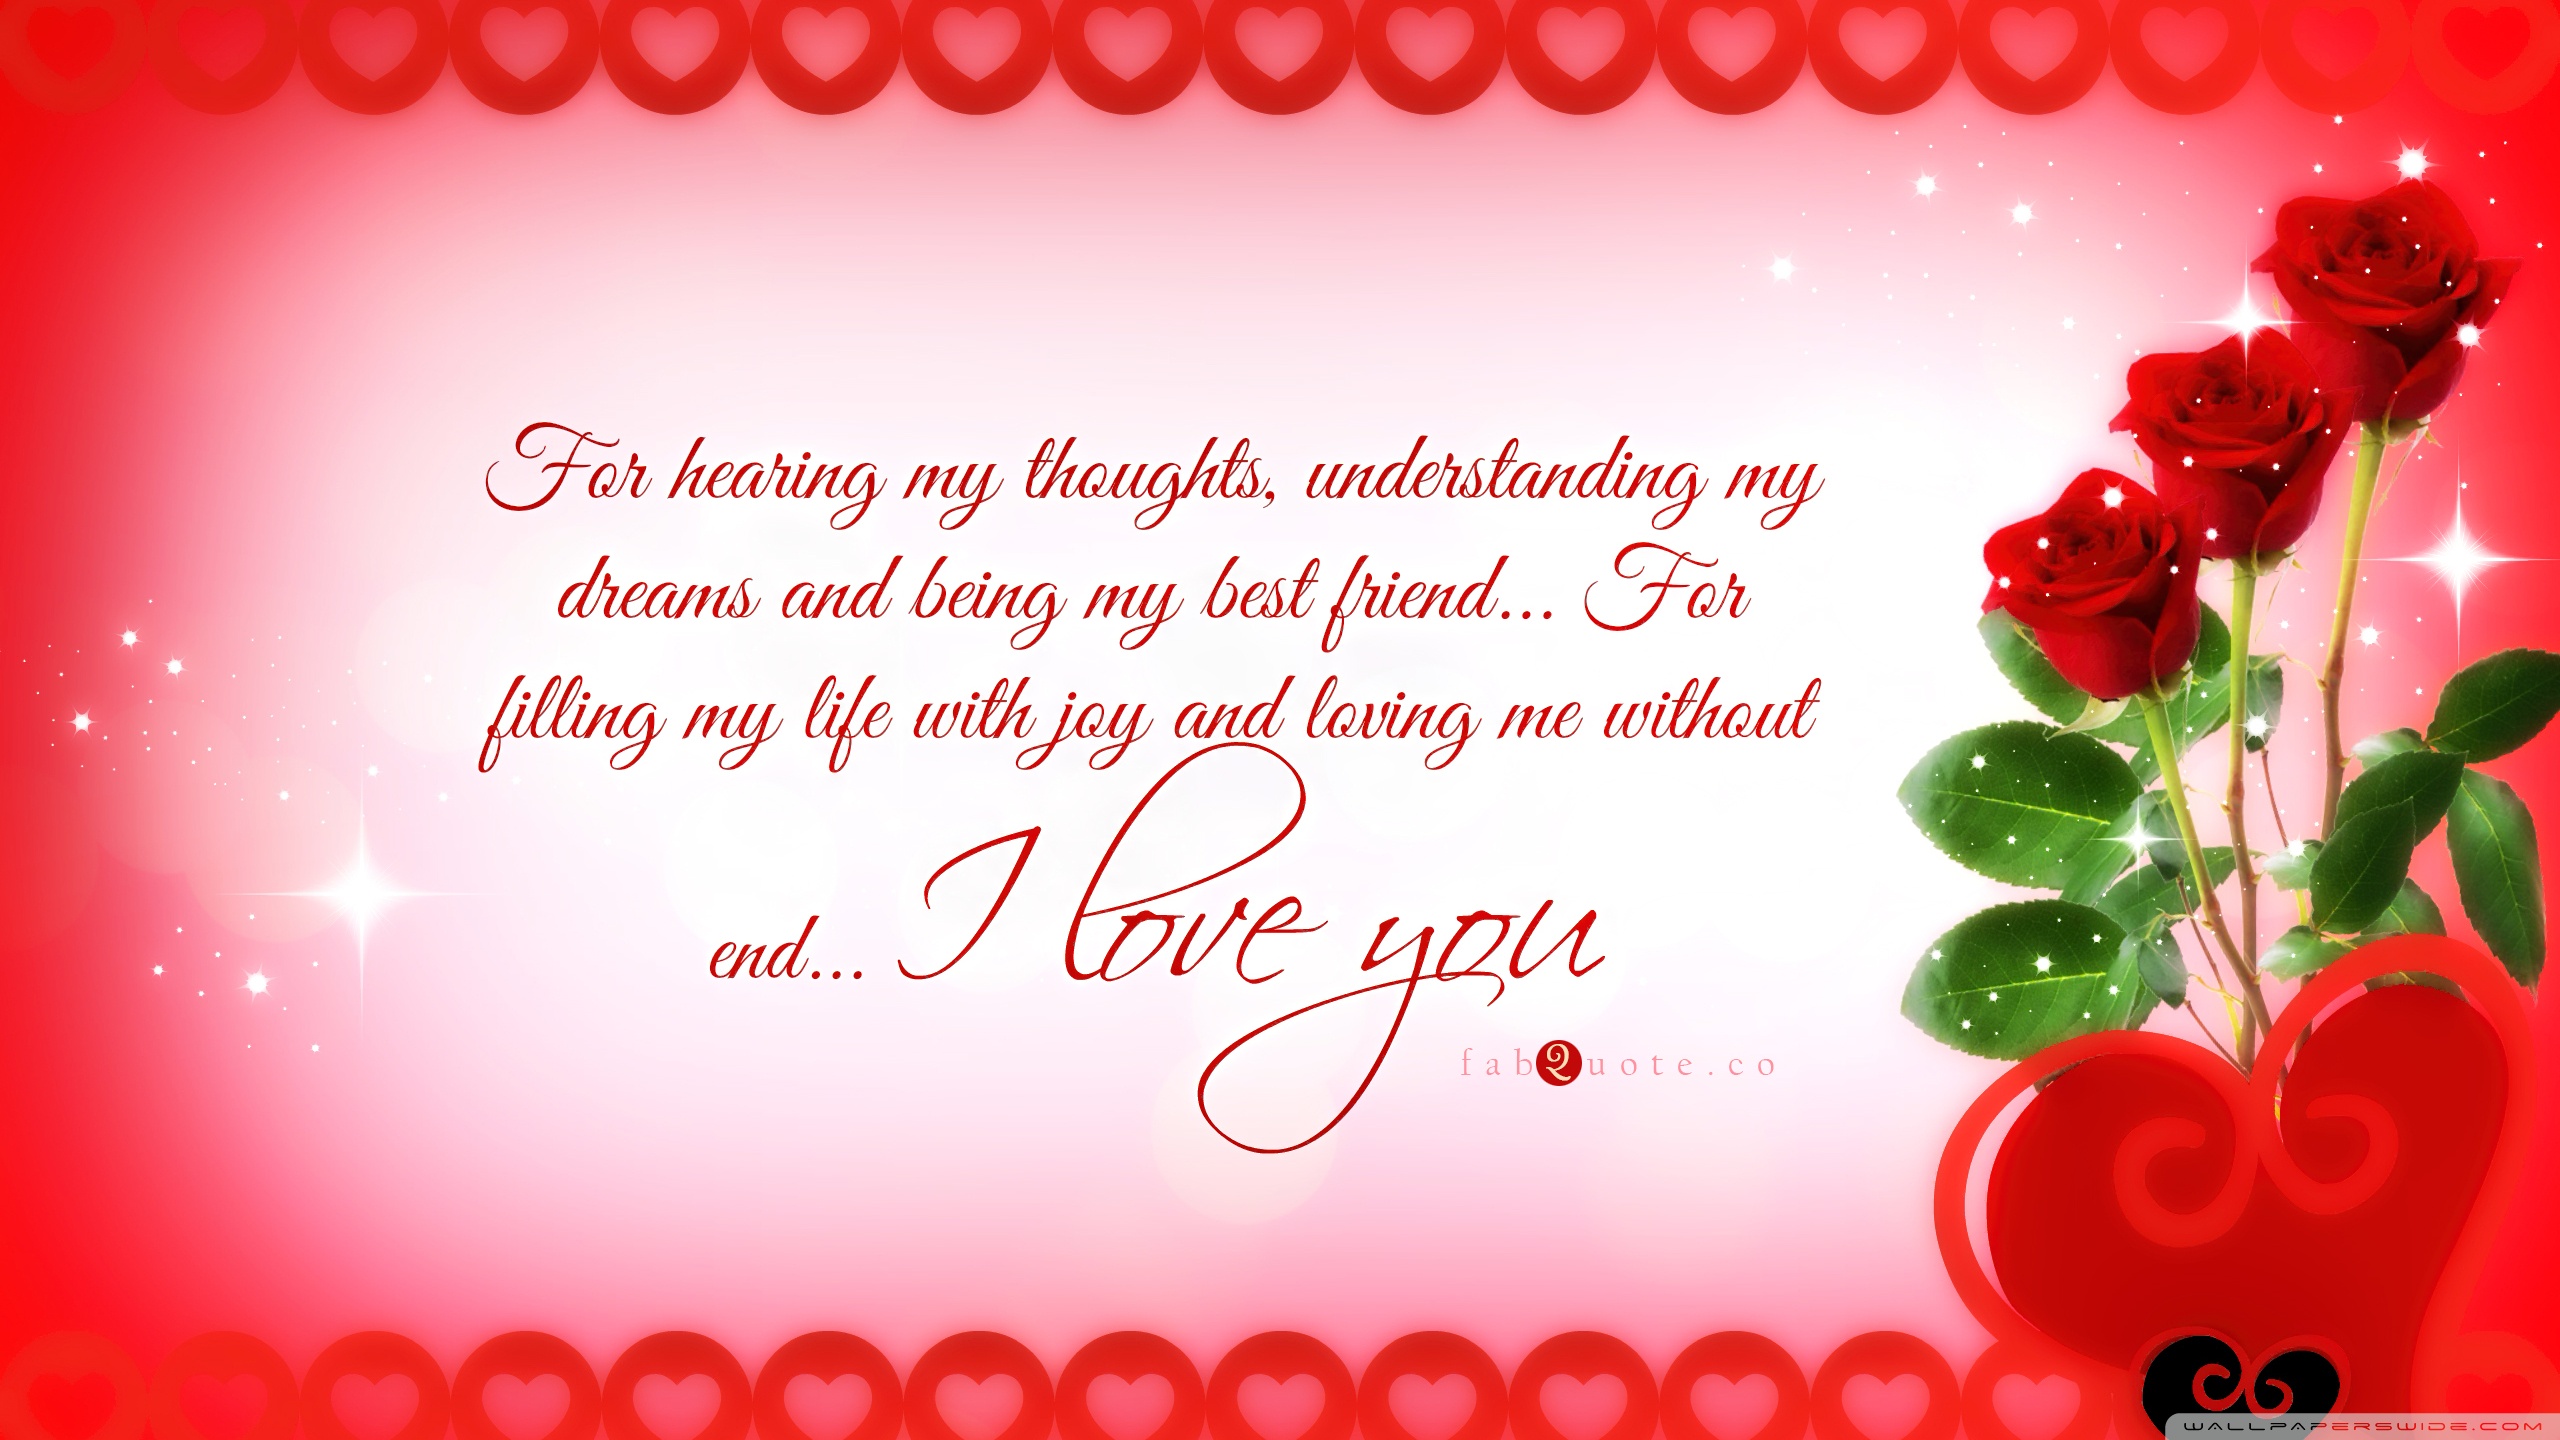 I Love You Heart Quotes Love Quotes Daily Wallpaper - Valentines Card Message For A Friend - HD Wallpaper 